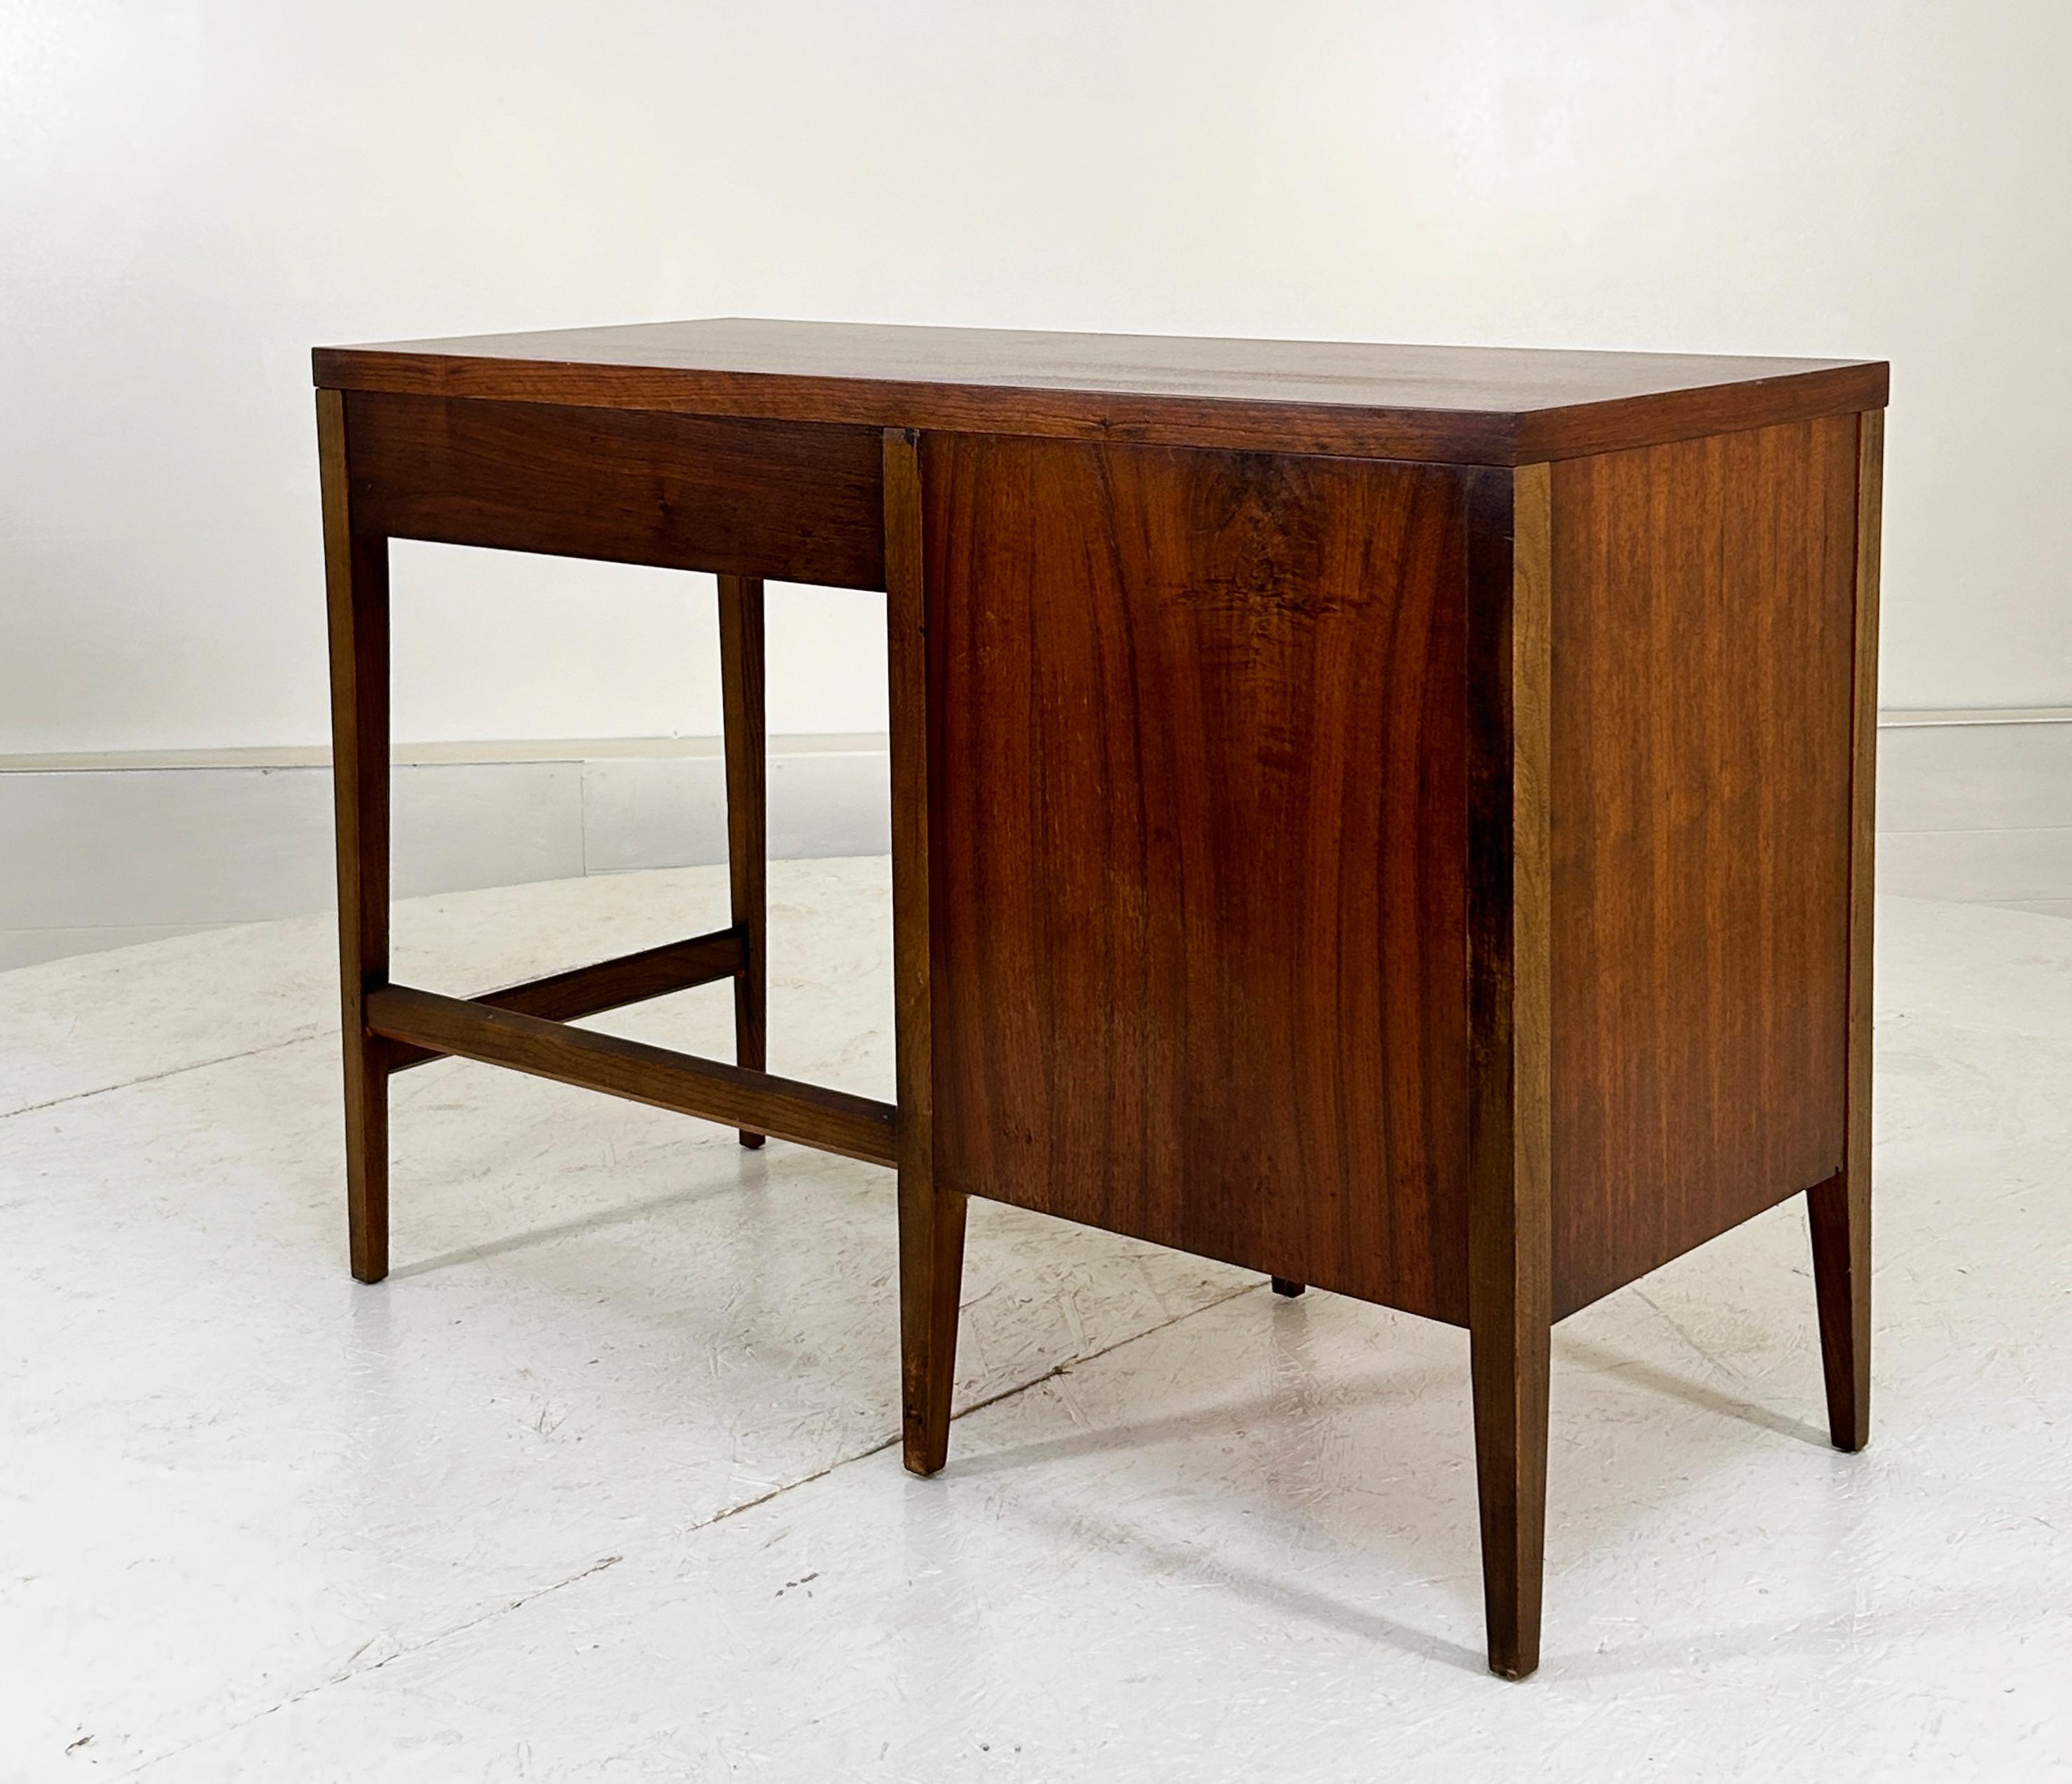 20th Century Desk or Vanity by Lane, Tuxedo series with chair For Sale